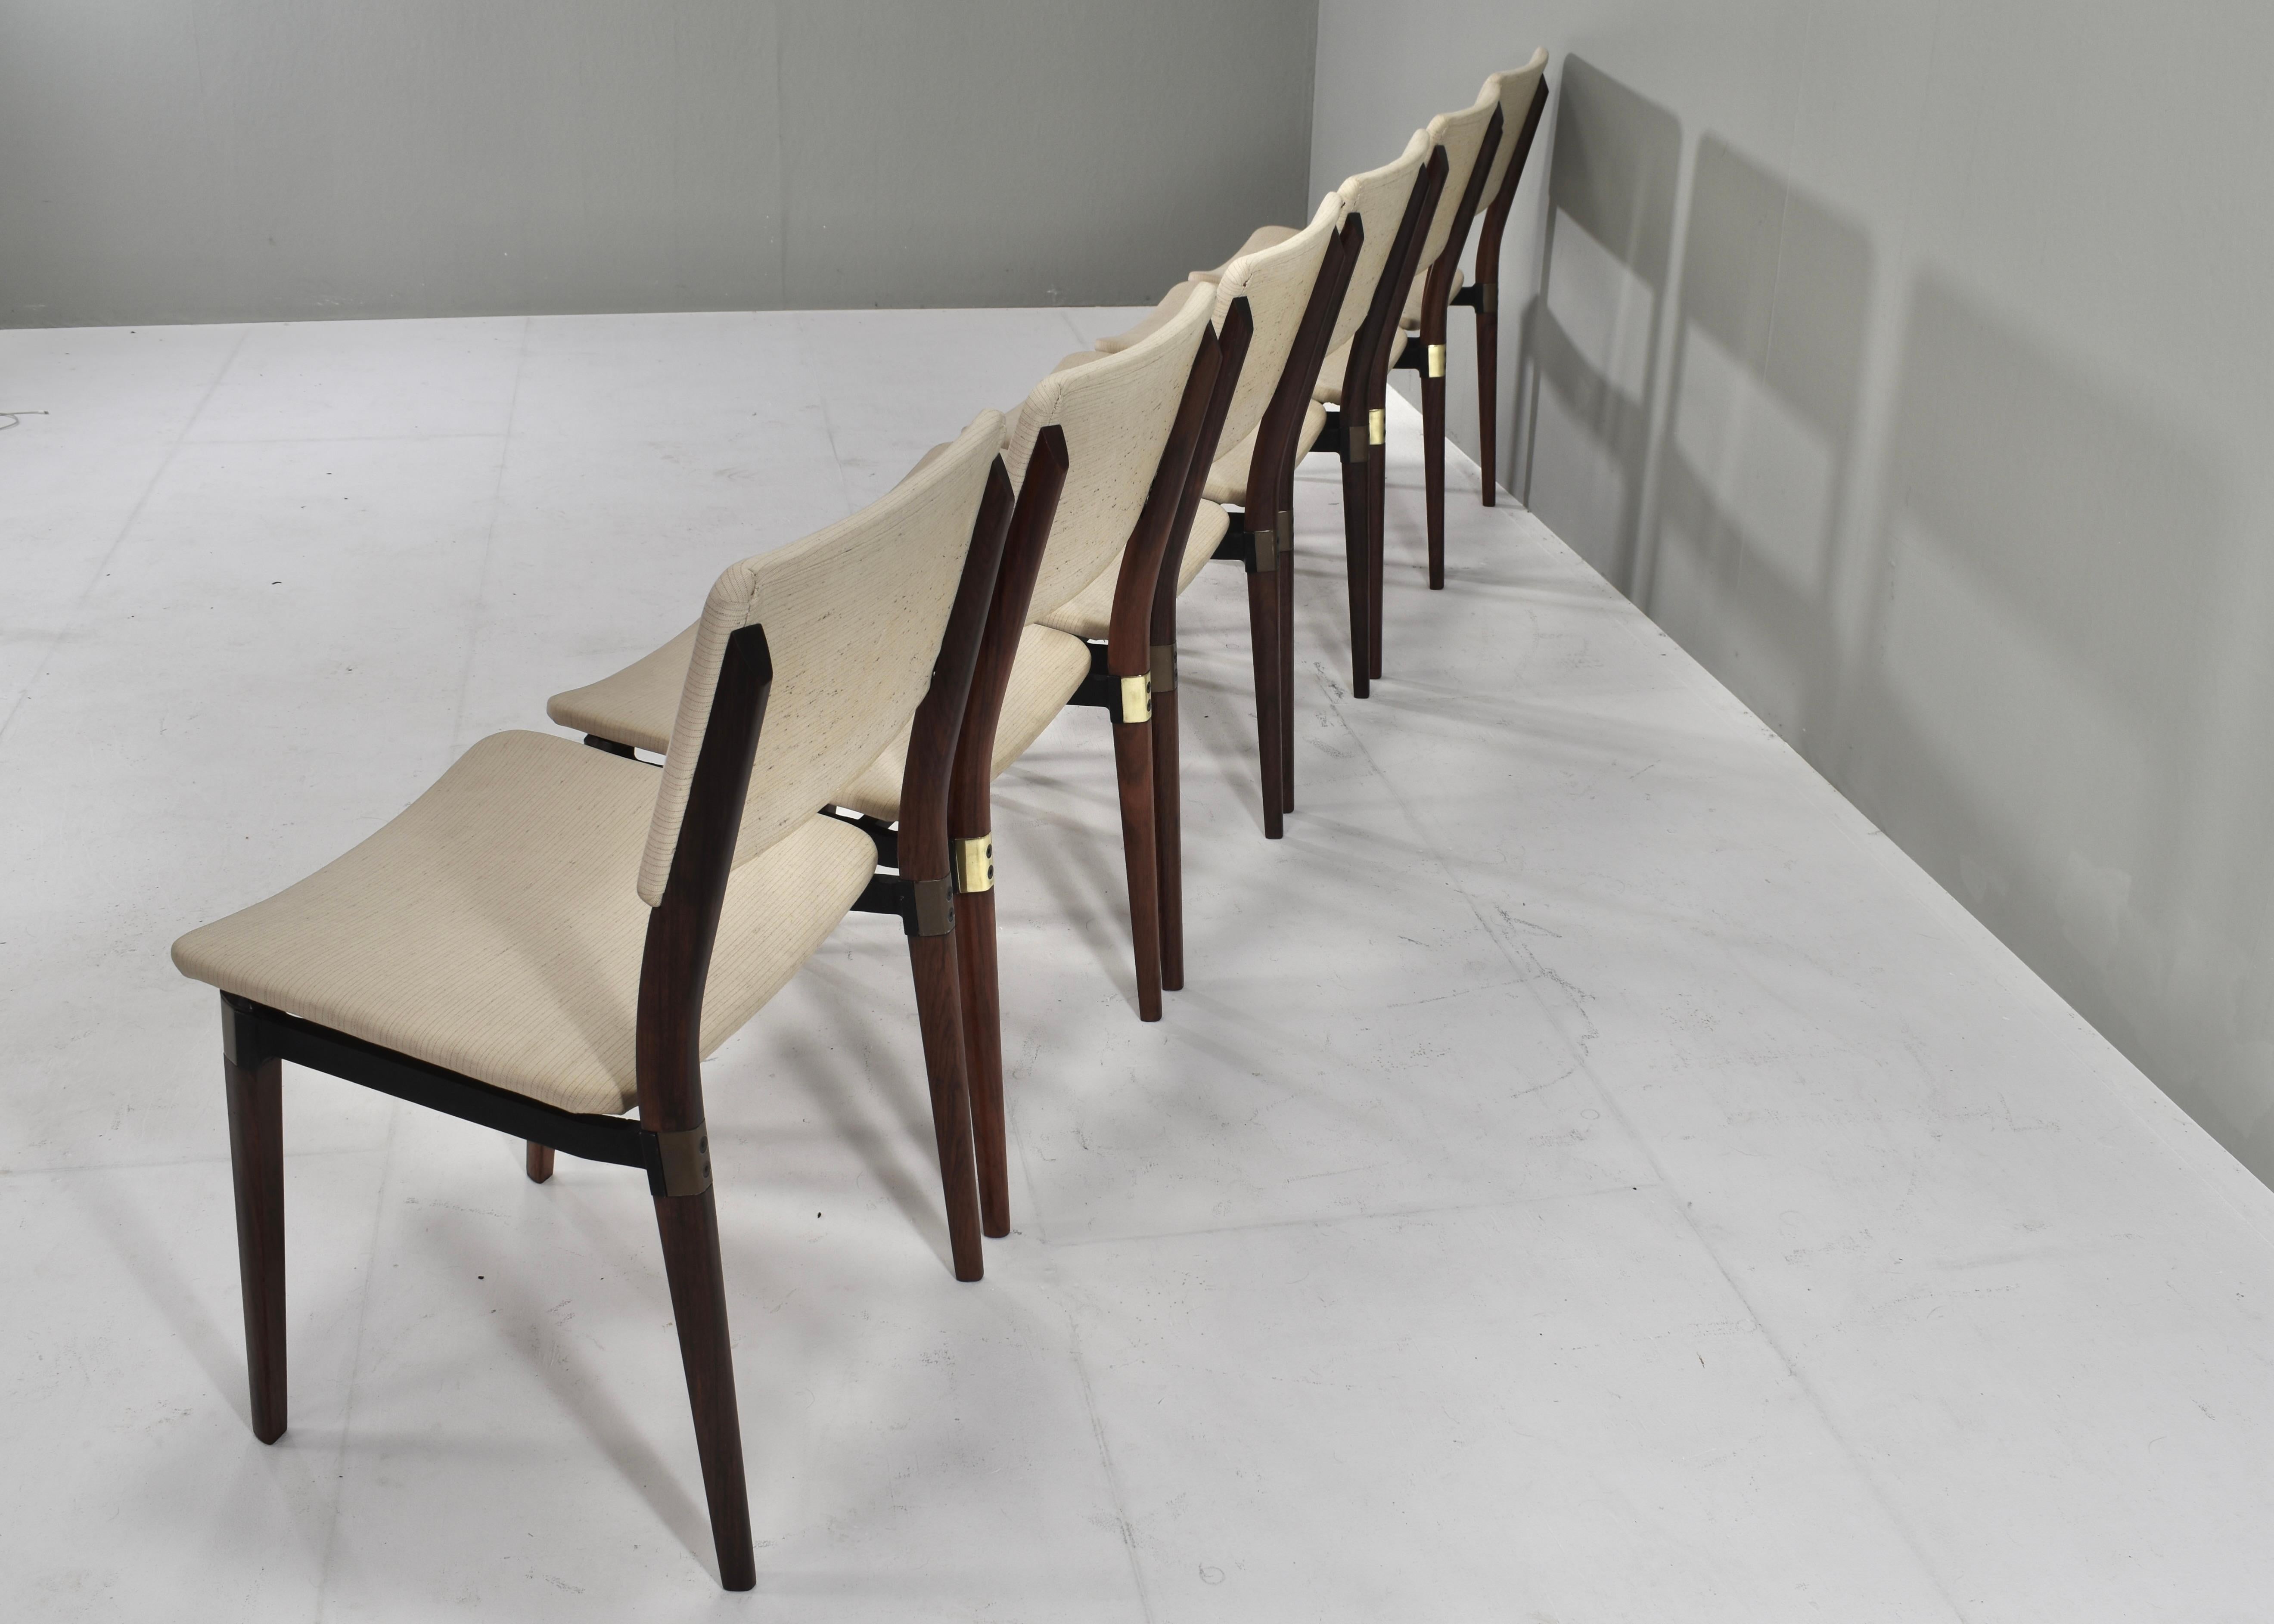 Eugenio Gerli S82 Dining Chairs Set of Six by Tecno, Italy, circa 1960 In Good Condition For Sale In Pijnacker, Zuid-Holland